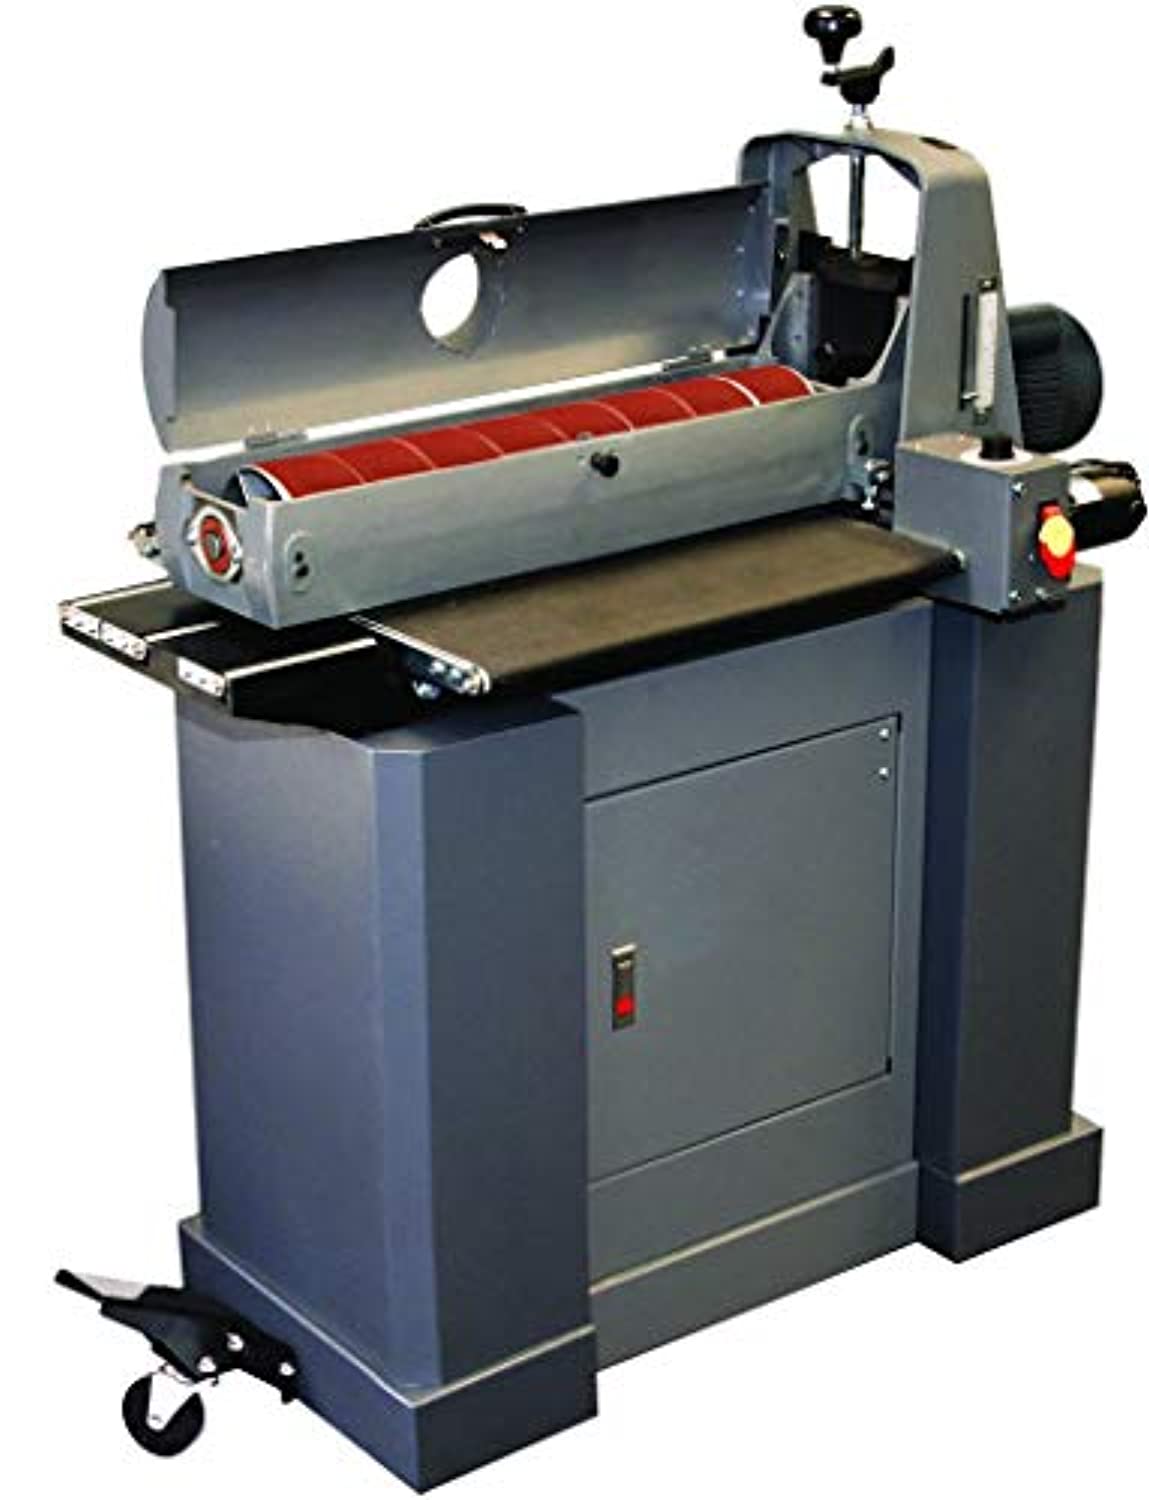 SUPERMAX TOOLS Drum Sander with Closed Mobile Base Stand. Sands 25" on Single Pass and up to 50" with Double - Model 25-50